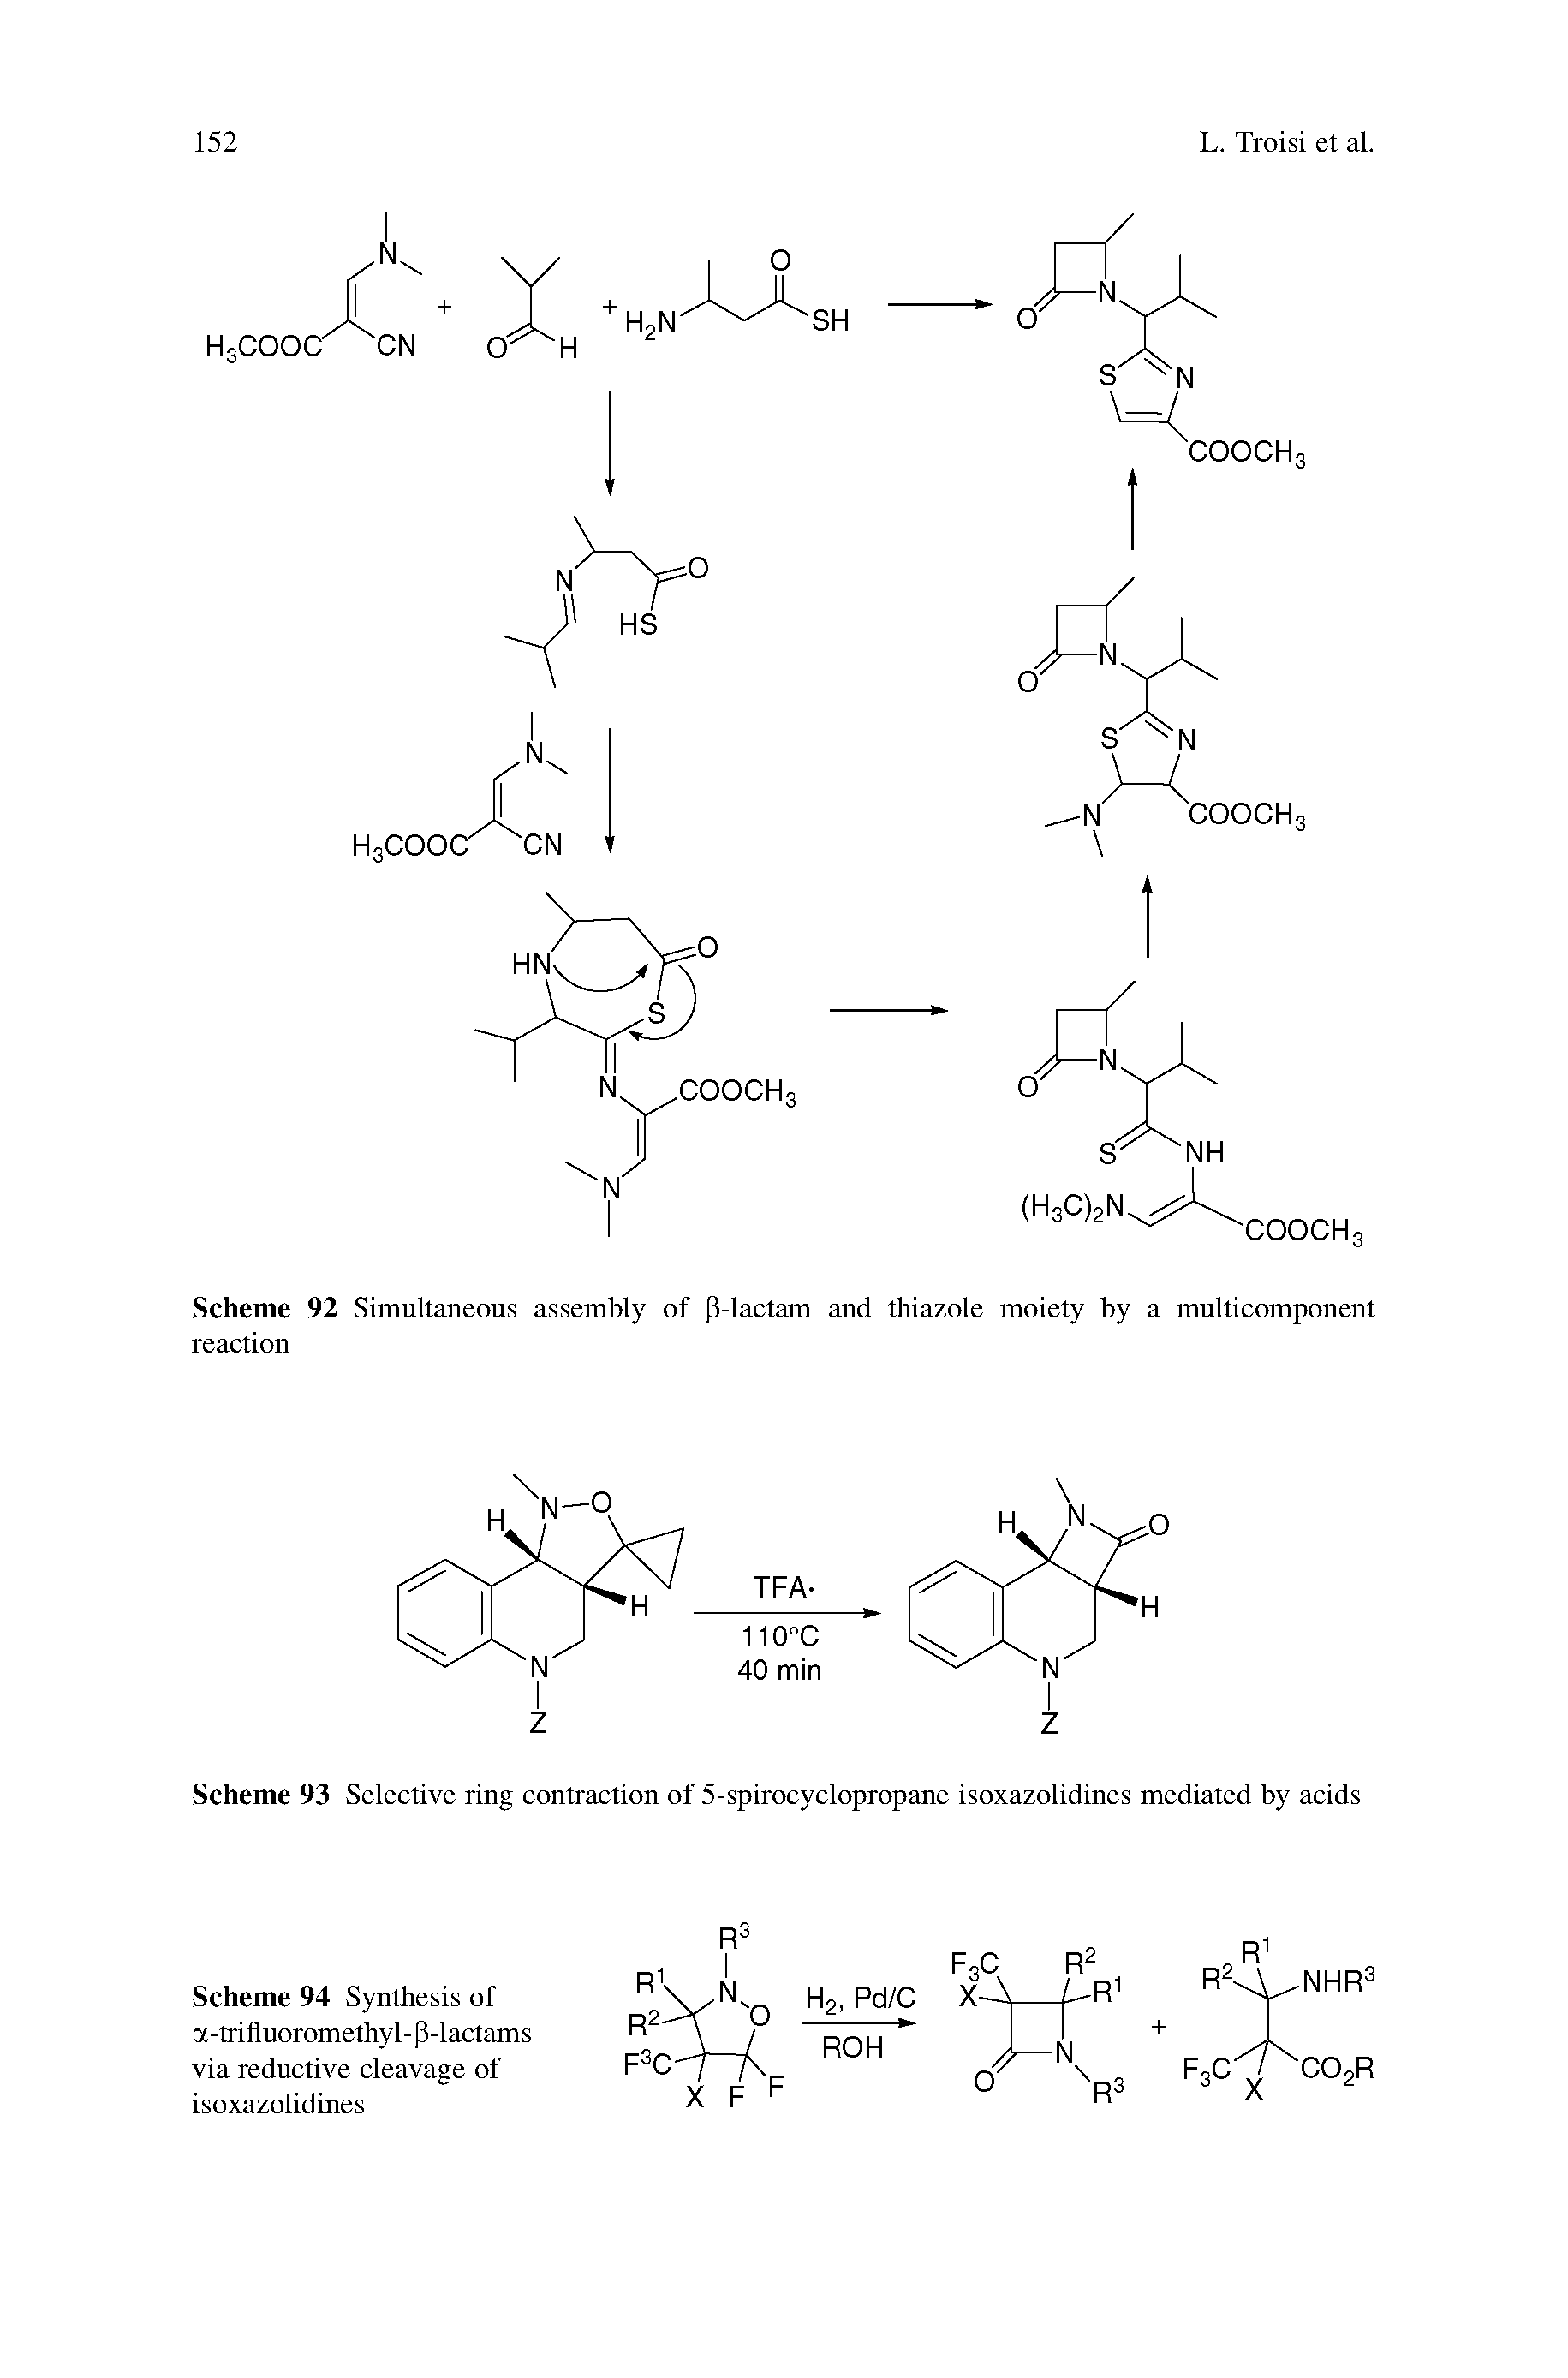 Scheme 92 Simultaneous assembly of [1-lactam and thiazole moiety by a multicomponent reaction...